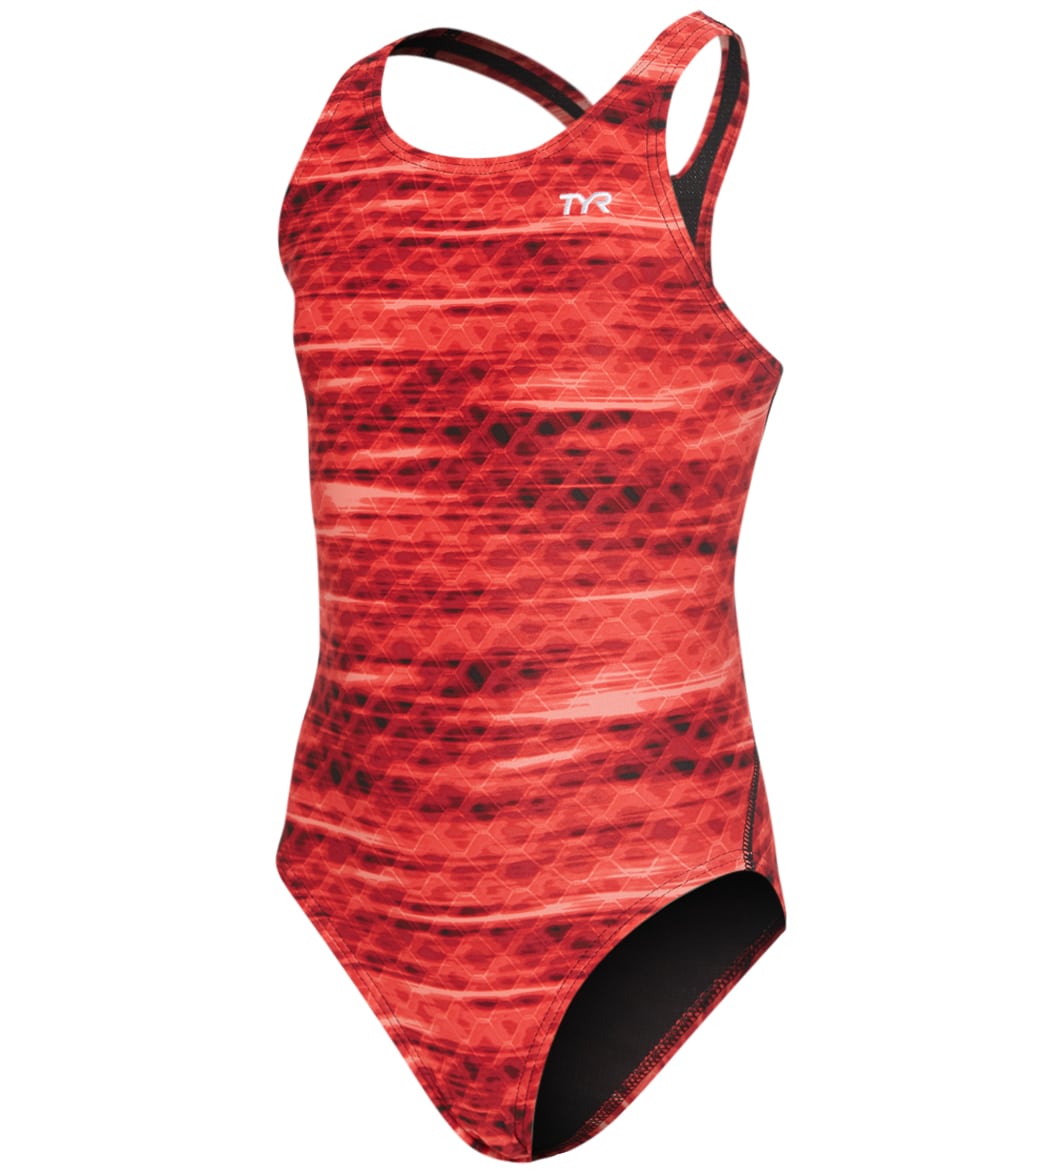 TYR Girls' Castaway Maxfit One Piece Swimsuit - Red 24 - Swimoutlet.com